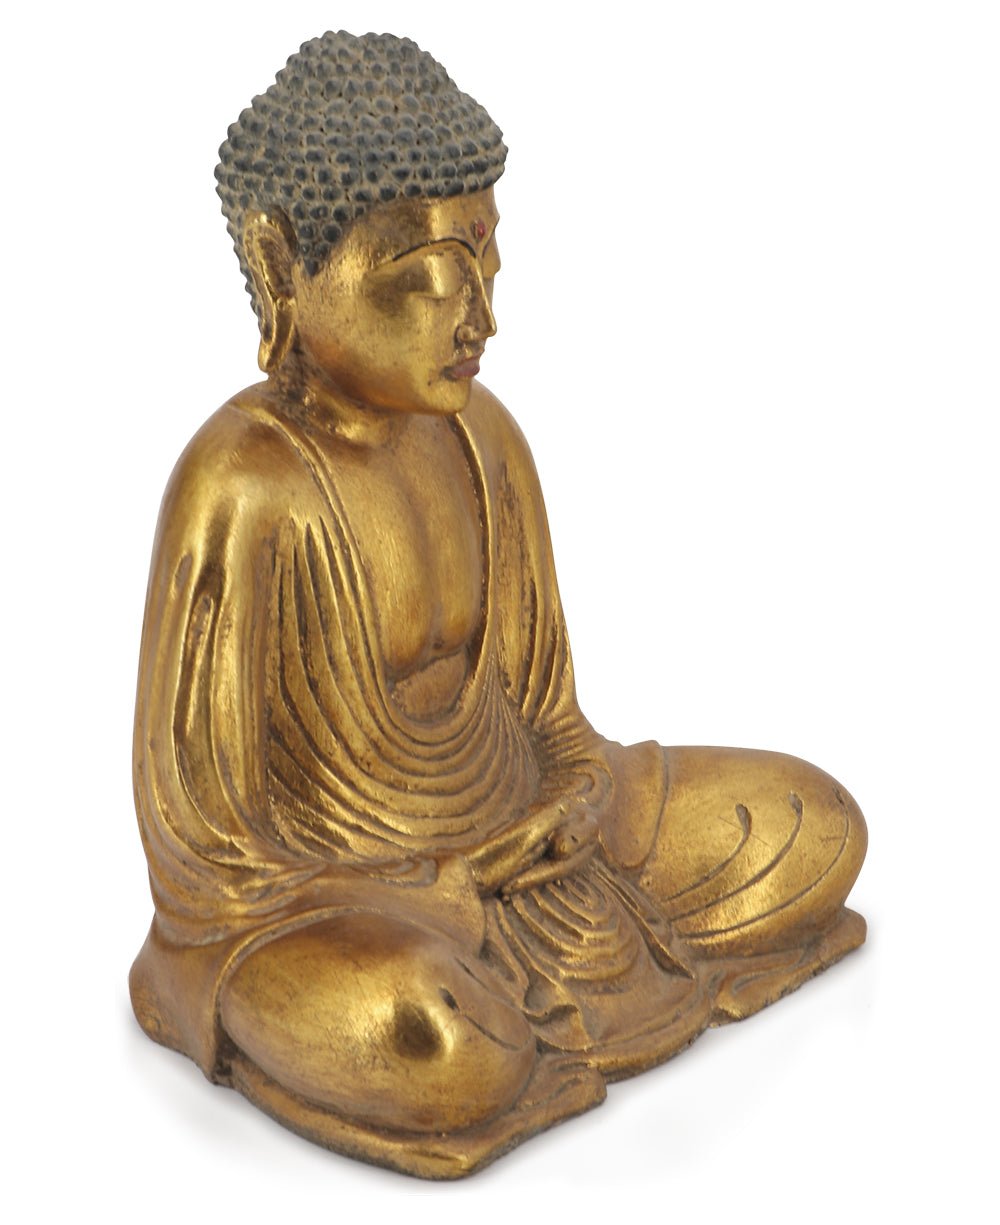 Meditating Buddha Statue in Antique Gold Finish, 8 Inches High - Sculptures & Statues